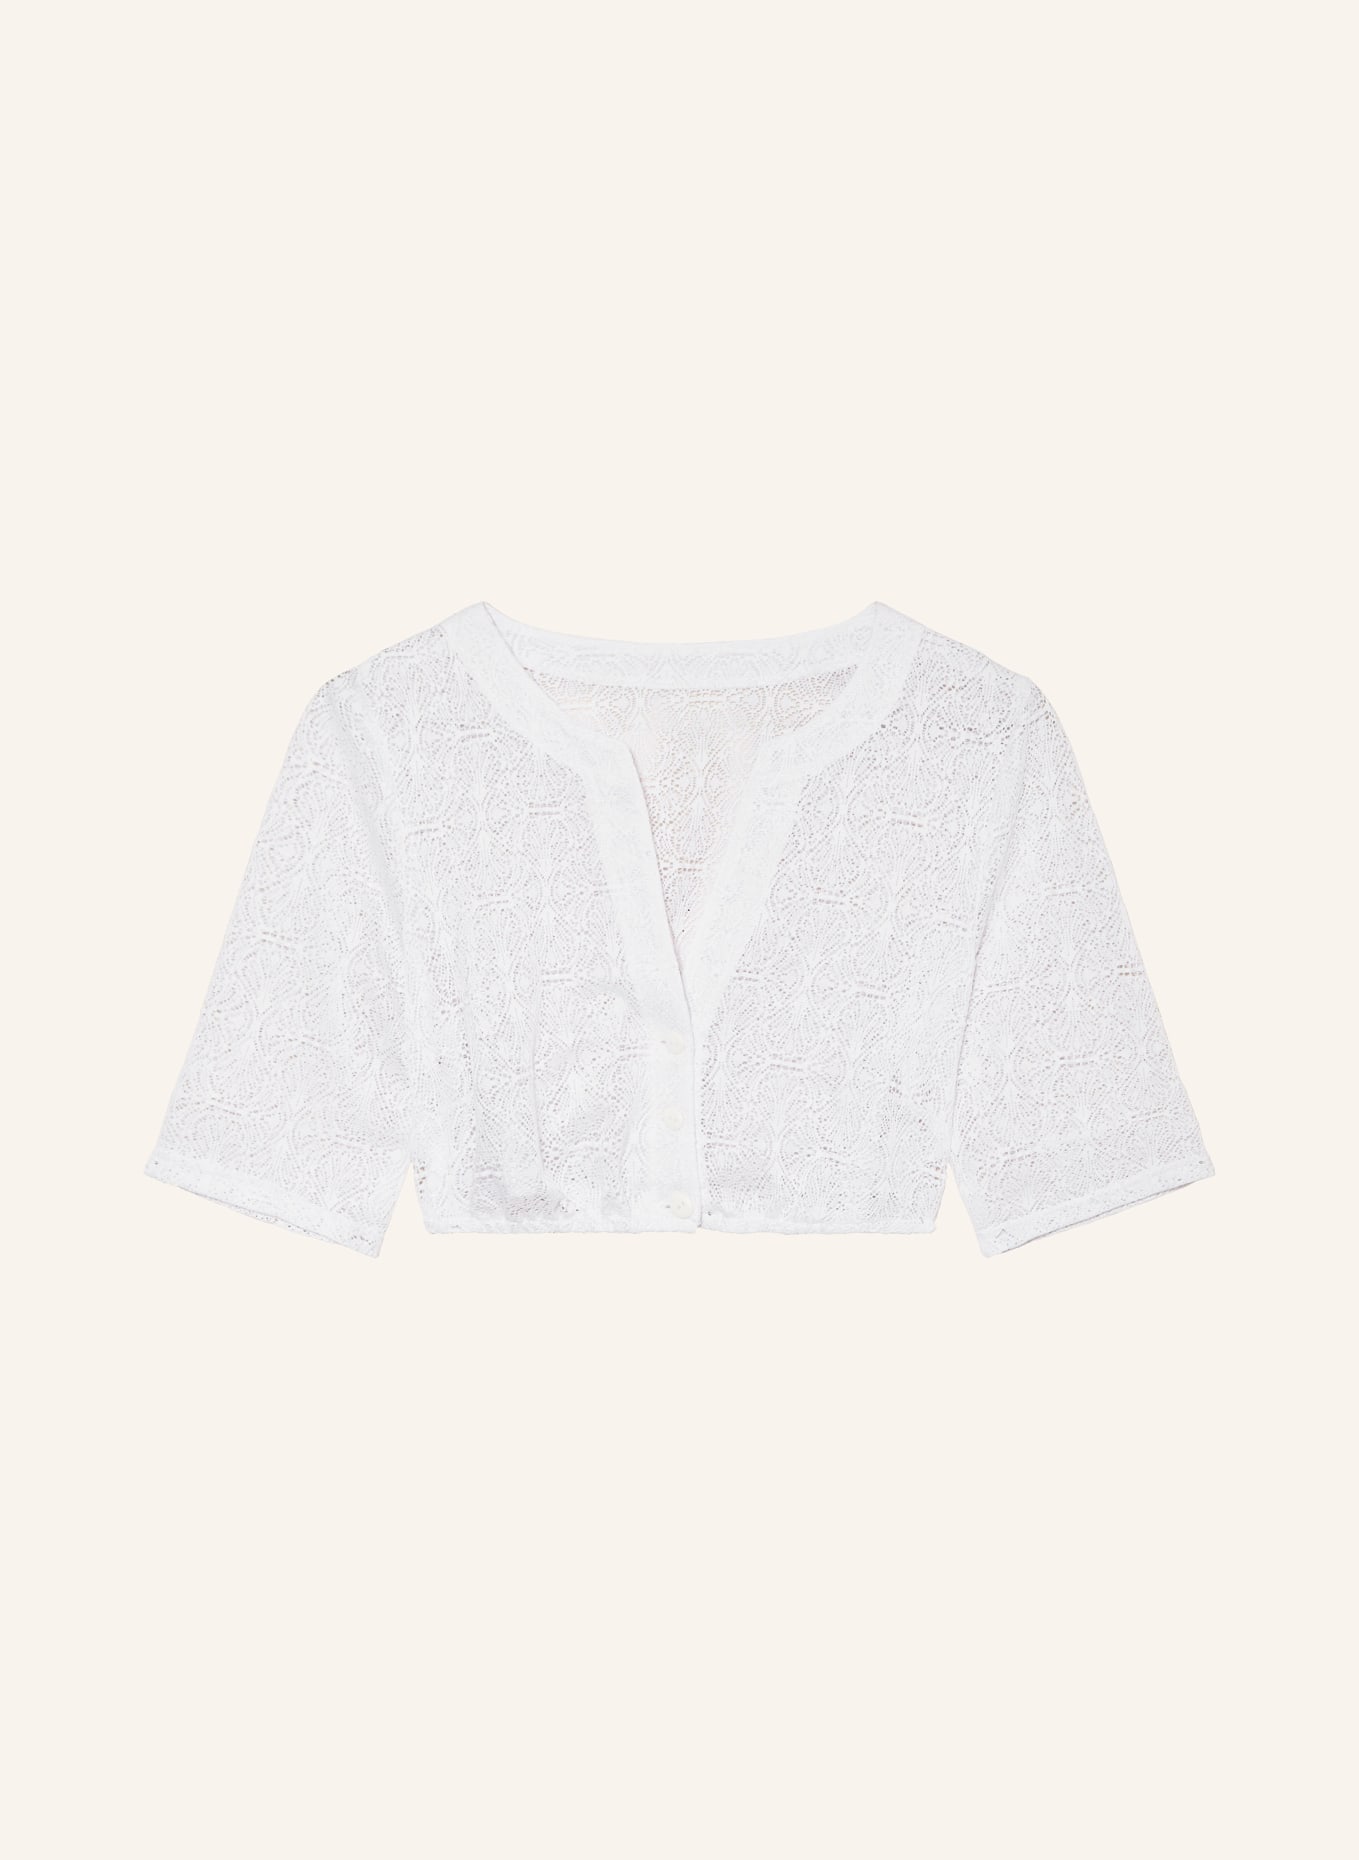 WALDORFF Dirndl blouse made of crochet lace, Color: WHITE (Image 1)